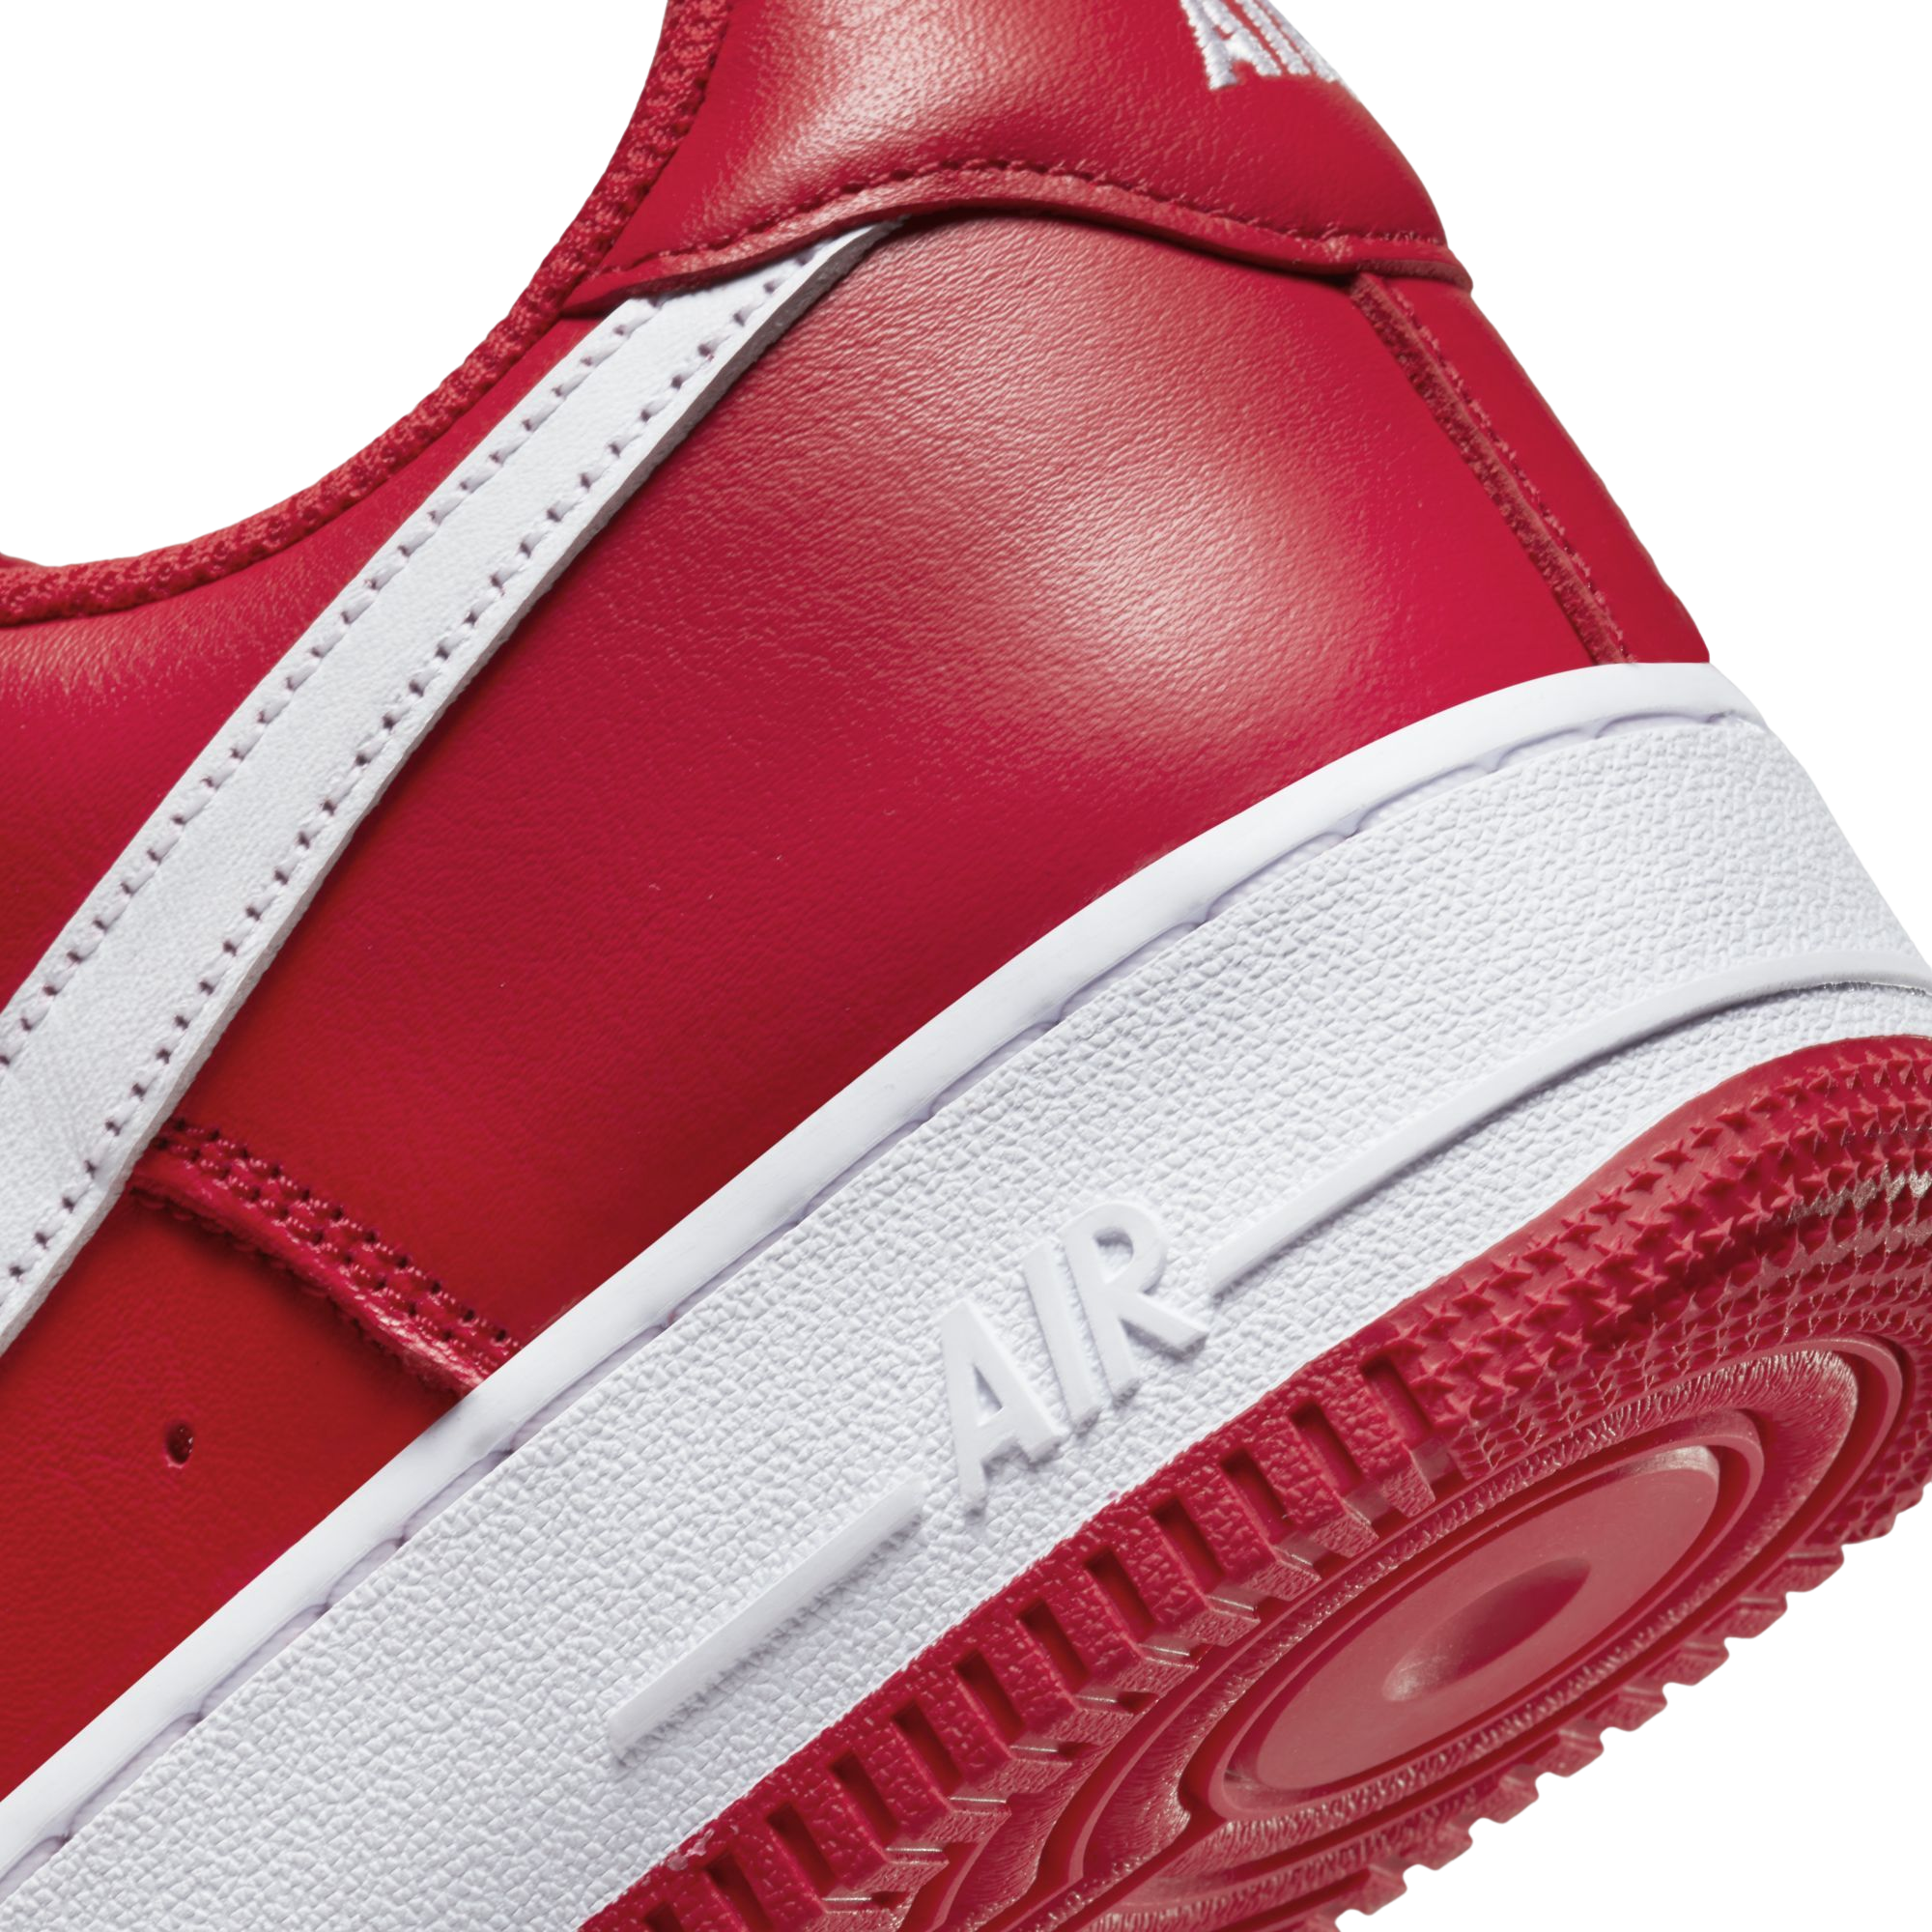 Nike Air Force 1 Low '07 University Red